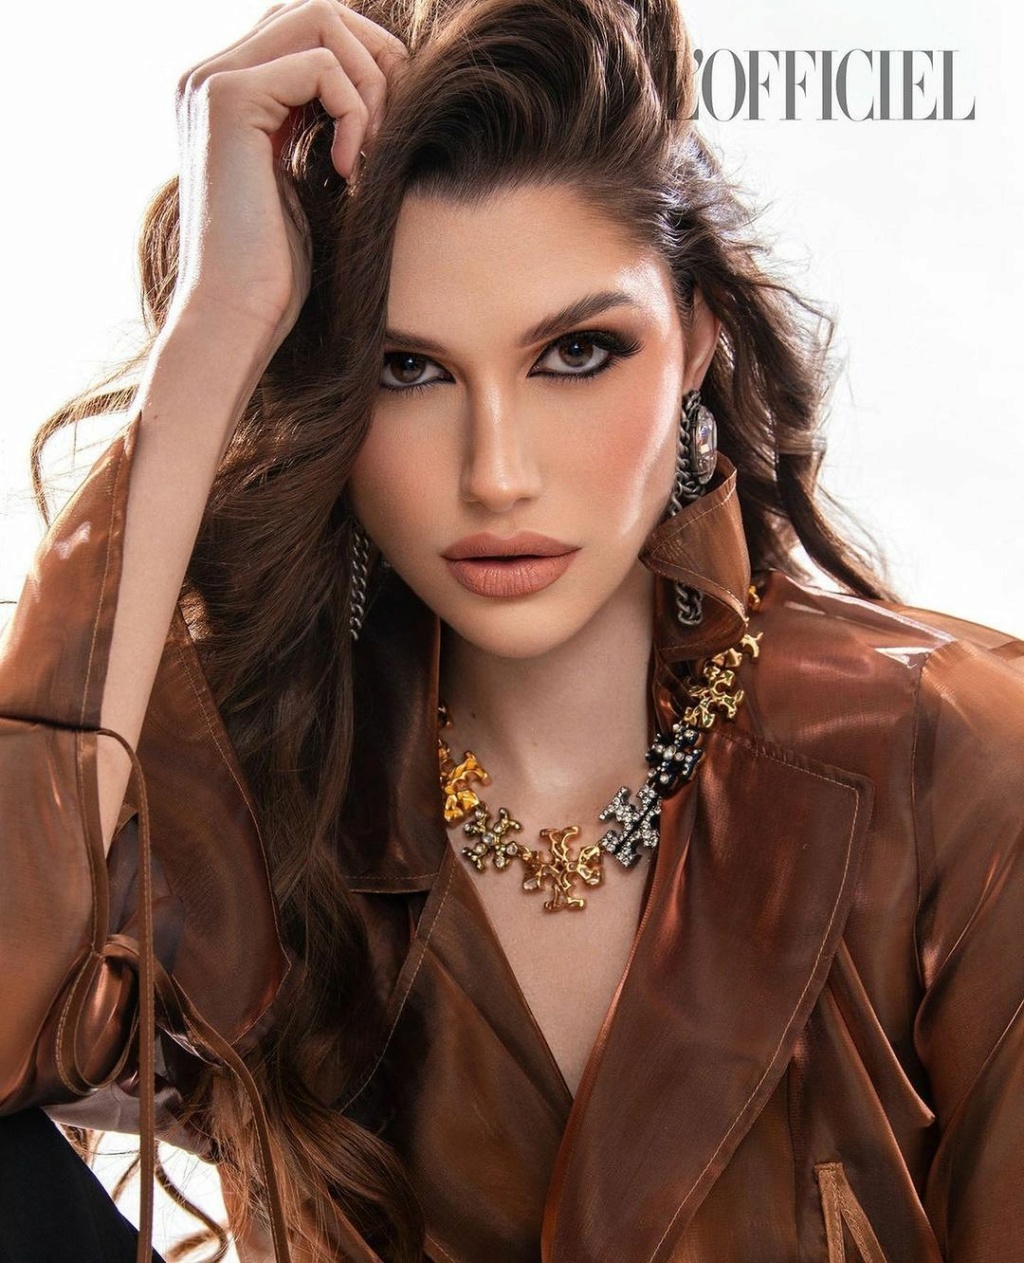 The Official Thread Of MISS GRAND INTERNATIONAL 2022 : ISABELLA MENIN from BRAZIL. - Page 2 36328110